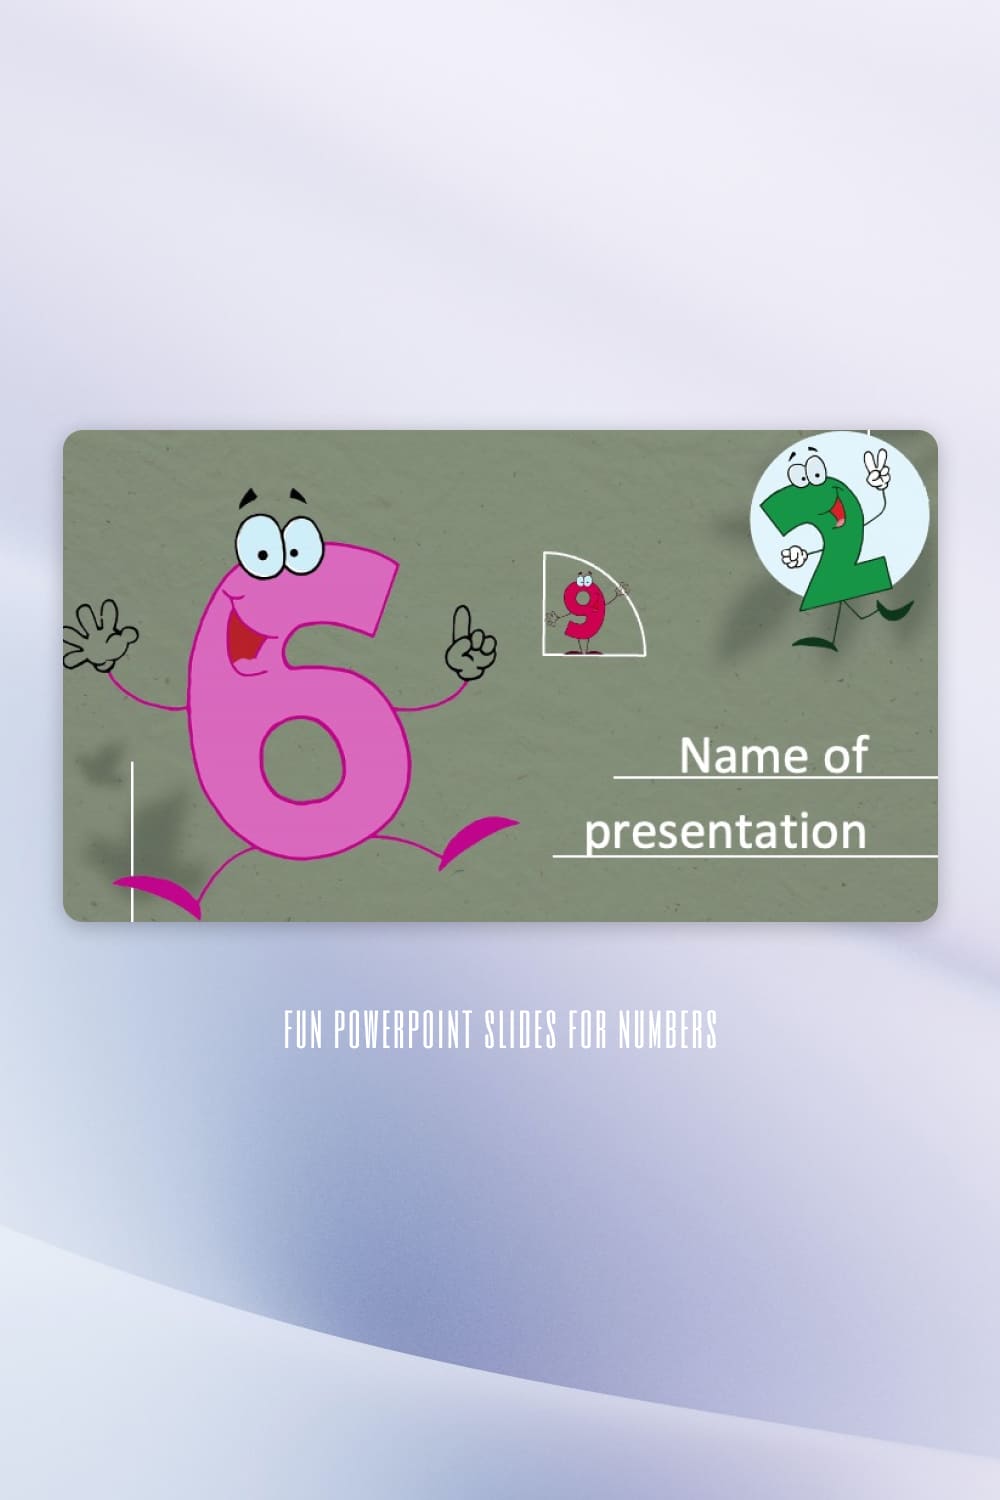 Fun Powerpoint Slides For Numbers Pinterest.